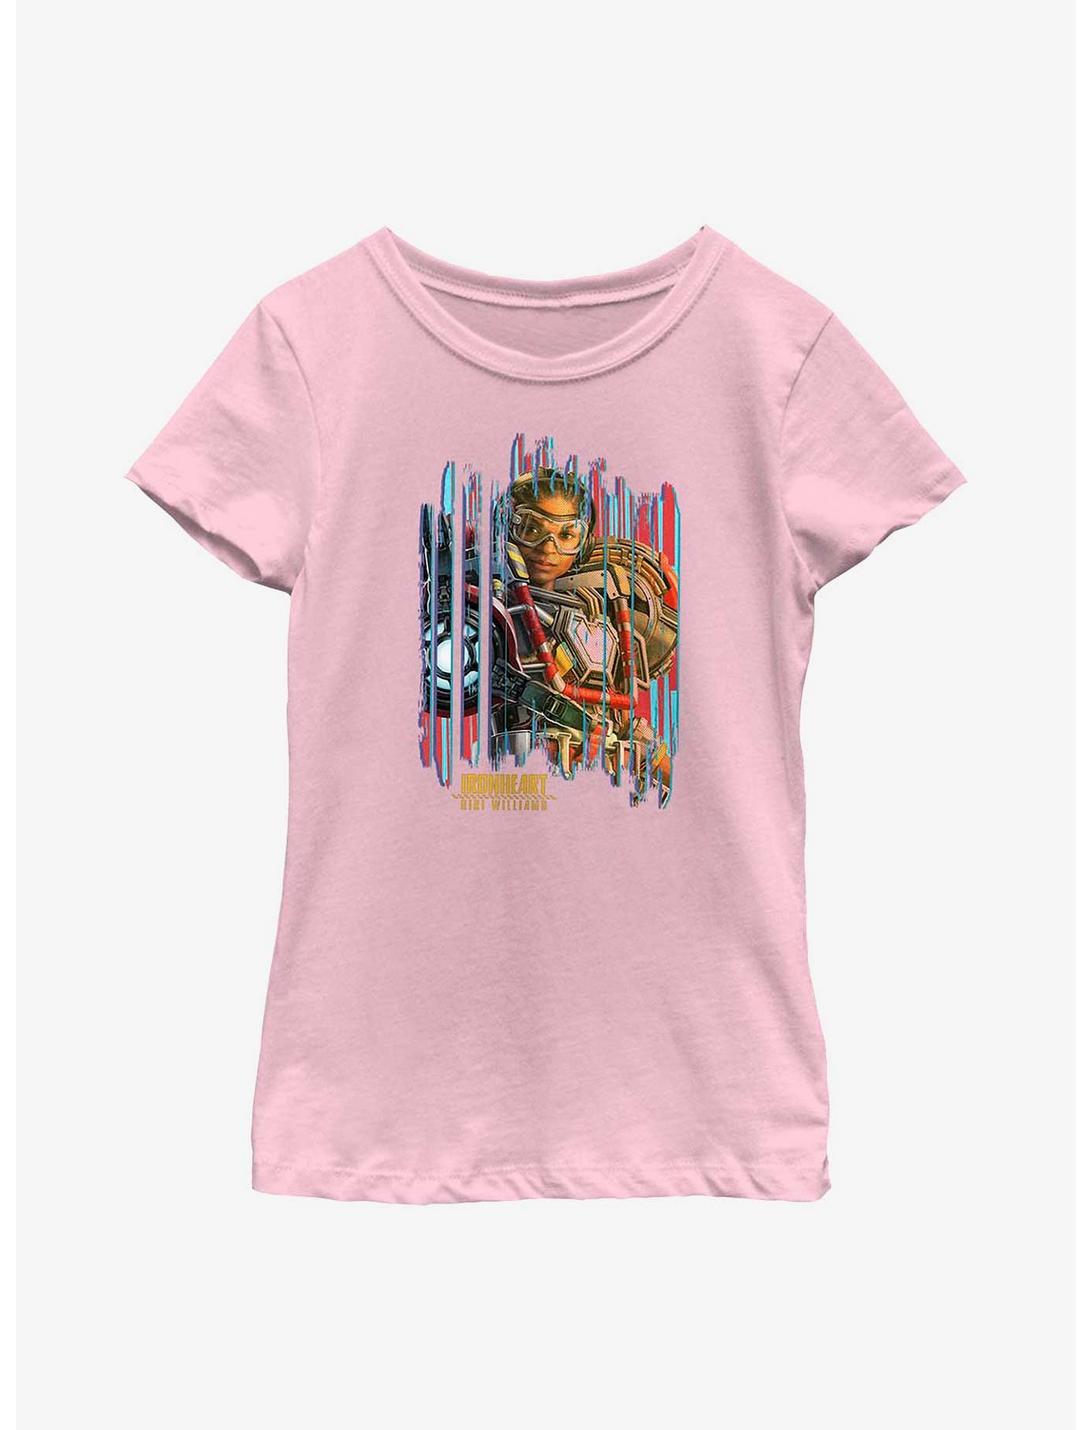 Marvel Black Panther: Wakanda Forever Ironheart Poster Look Youth Girls T-Shirt, PINK, hi-res